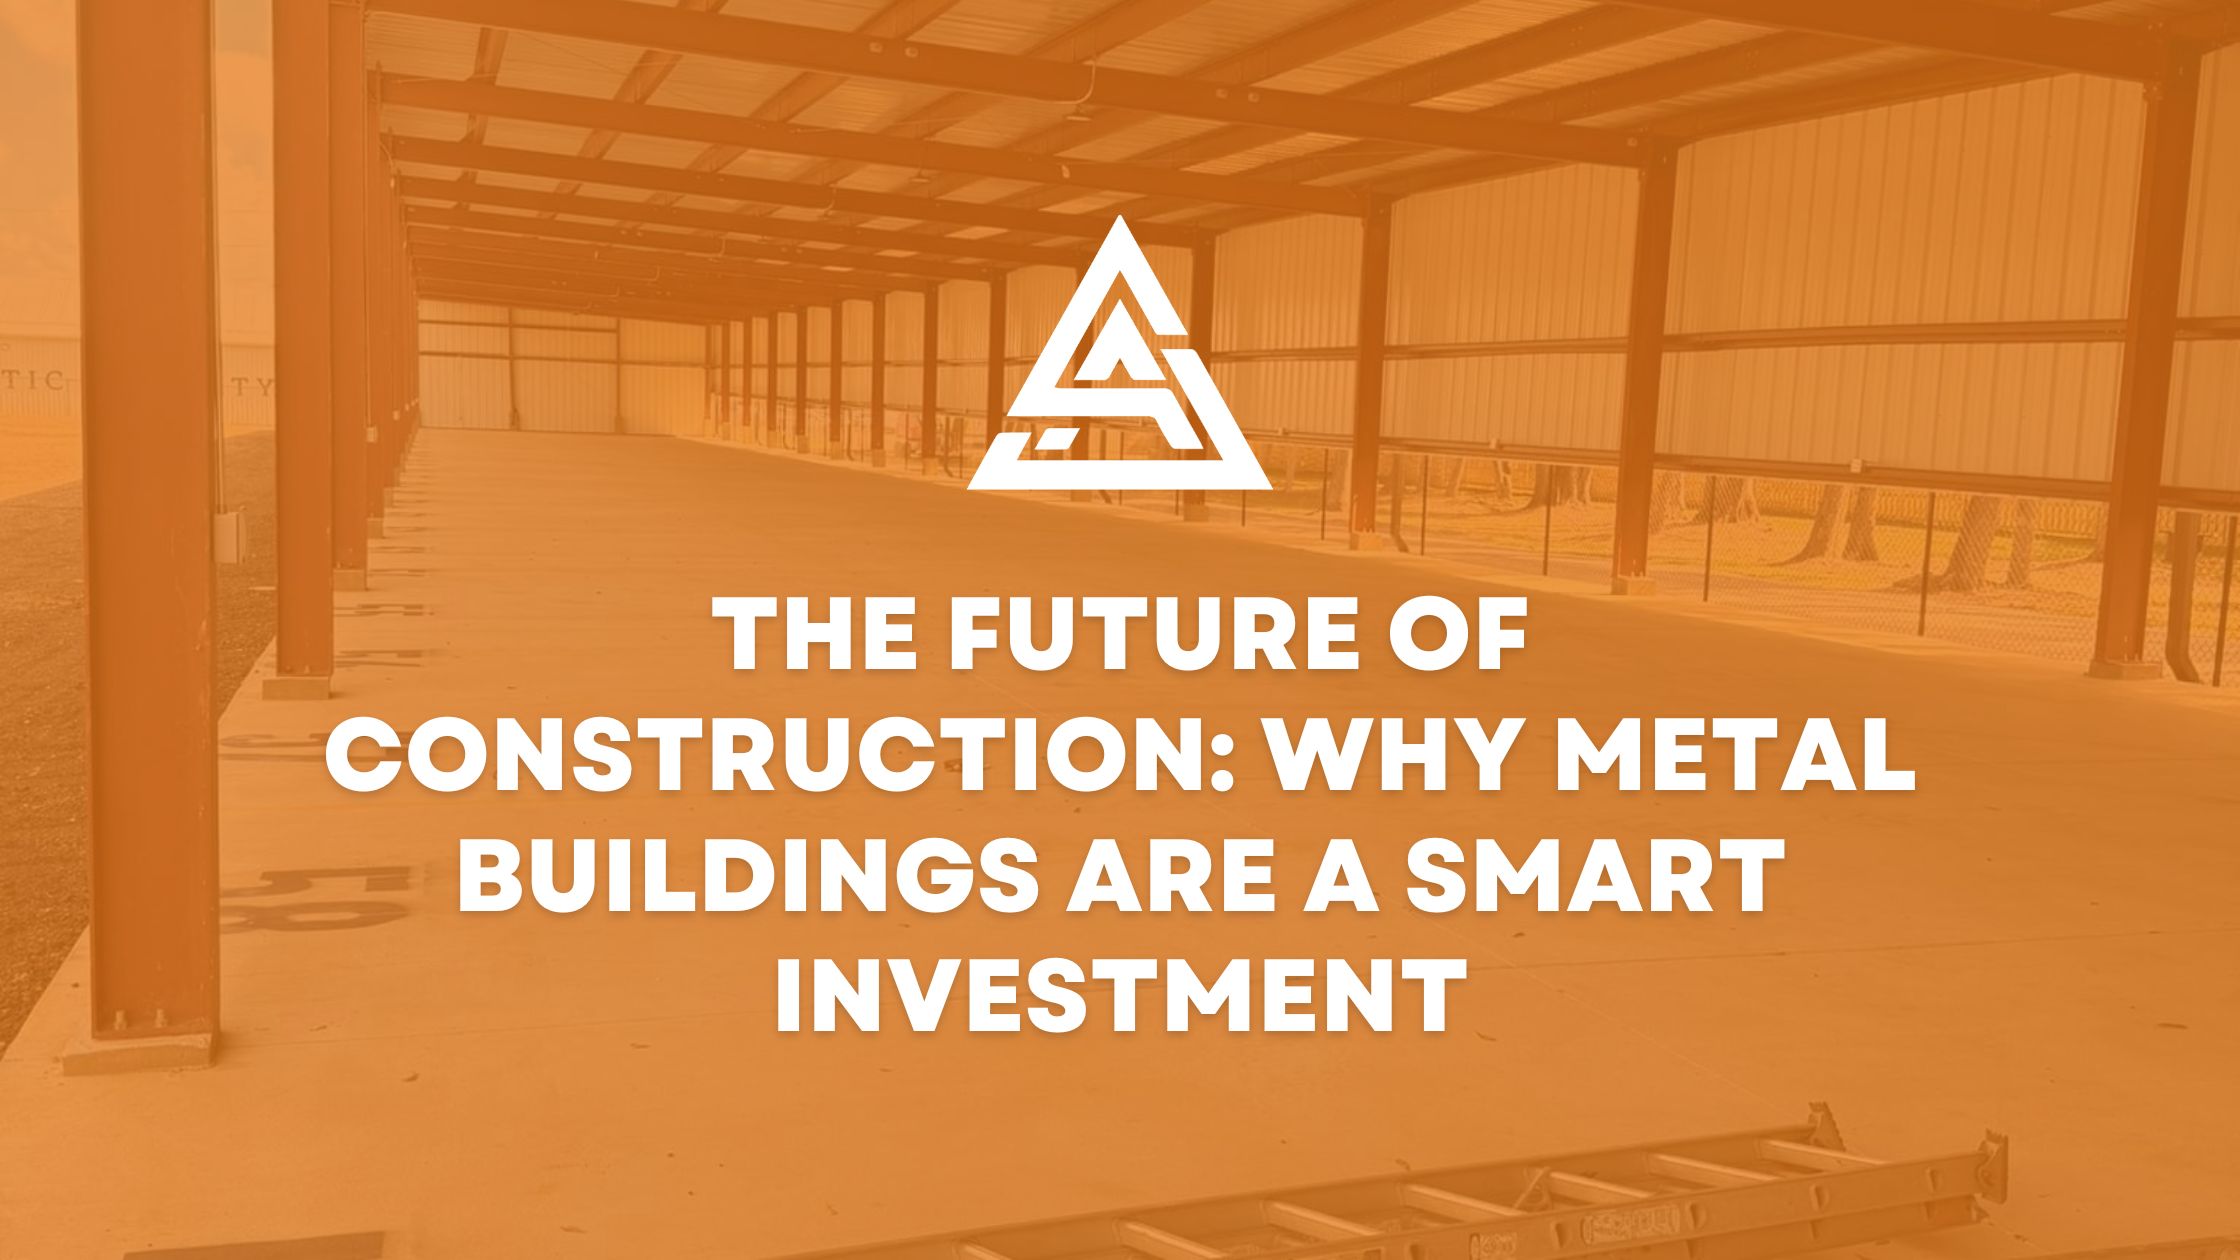 The Future of Construction: Why Metal Buildings are a Smart Investment